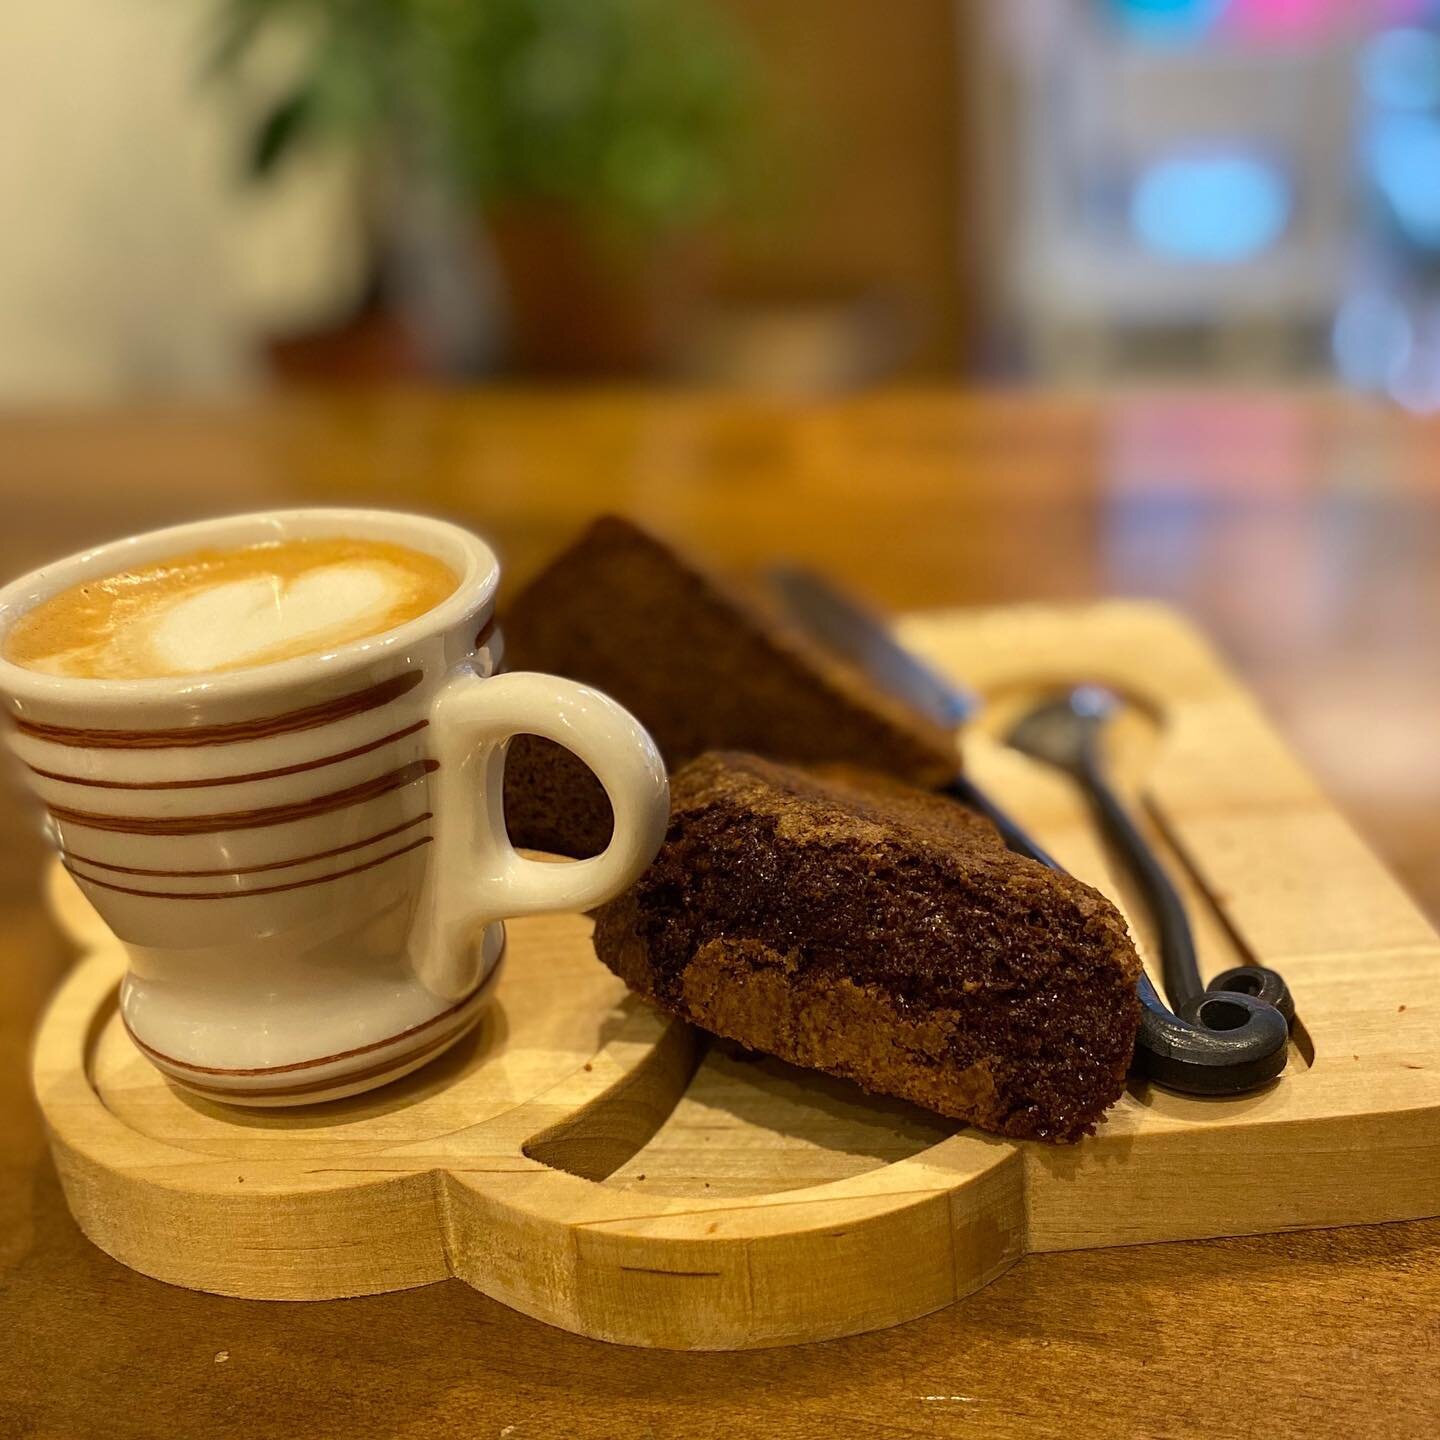 It&rsquo;s the perfect morning to indulge in freshly baked banana bread 🍌 🍞 and a cortado ☕️! #goodmorning #chezlilydc #weekendvibes